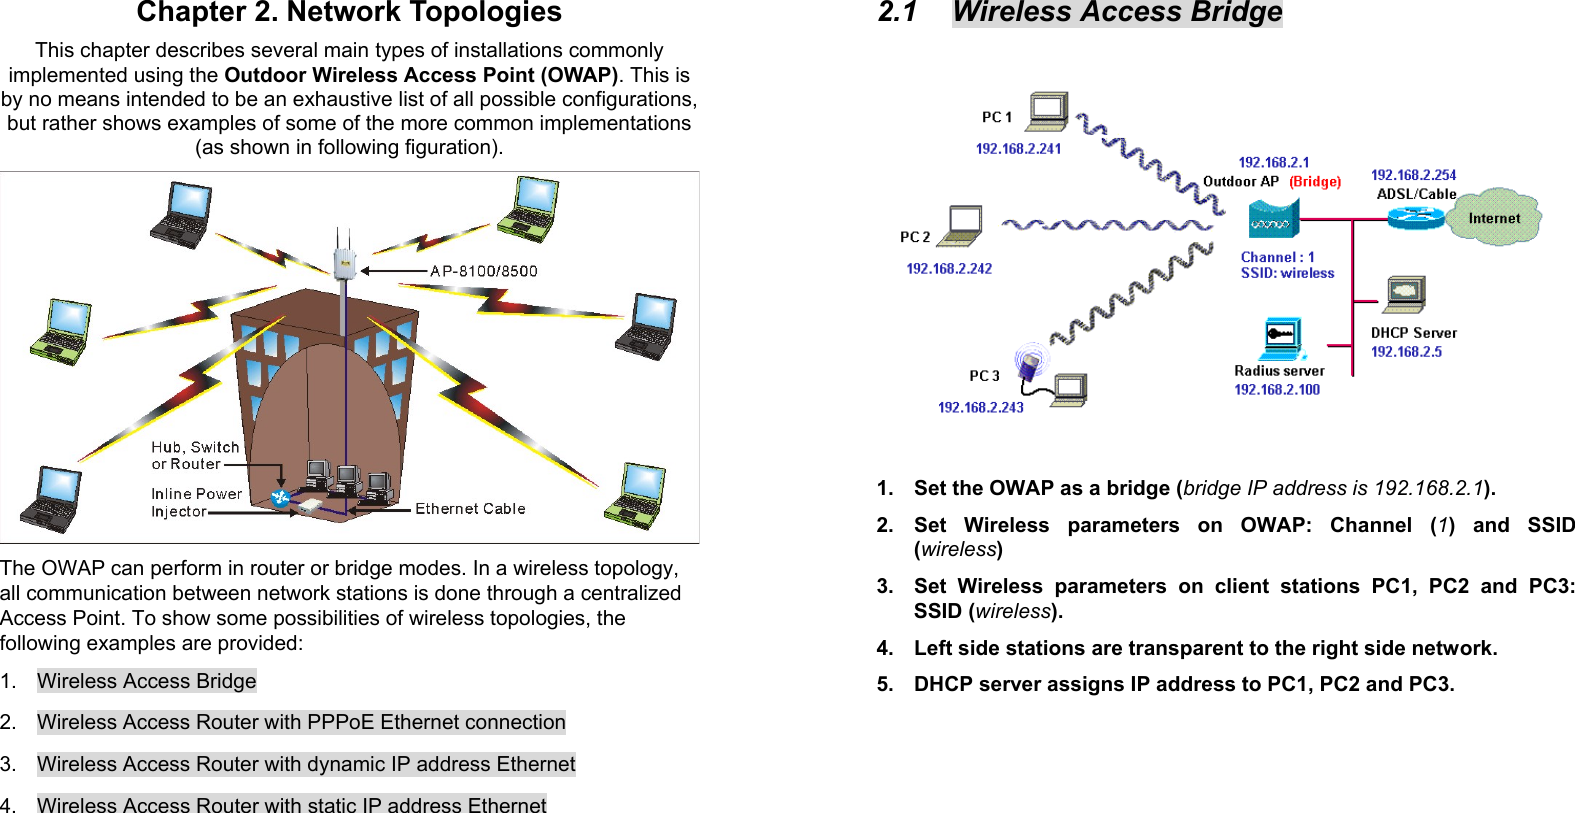 6Chapter 2. Network TopologiesThis chapter describes several main types of installations commonlyimplemented using the Outdoor Wireless Access Point (OWAP). This isby no means intended to be an exhaustive list of all possible configurations,but rather shows examples of some of the more common implementations(as shown in following figuration).The OWAP can perform in router or bridge modes. In a wireless topology,all communication between network stations is done through a centralizedAccess Point. To show some possibilities of wireless topologies, thefollowing examples are provided:1.  Wireless Access Bridge2.  Wireless Access Router with PPPoE Ethernet connection3.  Wireless Access Router with dynamic IP address Ethernet4.  Wireless Access Router with static IP address Ethernet72.1  Wireless Access Bridge1.  Set the OWAP as a bridge (bridge IP address is 192.168.2.1).2.  Set Wireless parameters on OWAP: Channel (1) and SSID(wireless)3.  Set Wireless parameters on client stations PC1, PC2 and PC3:SSID (wireless).4.  Left side stations are transparent to the right side network.5.  DHCP server assigns IP address to PC1, PC2 and PC3.